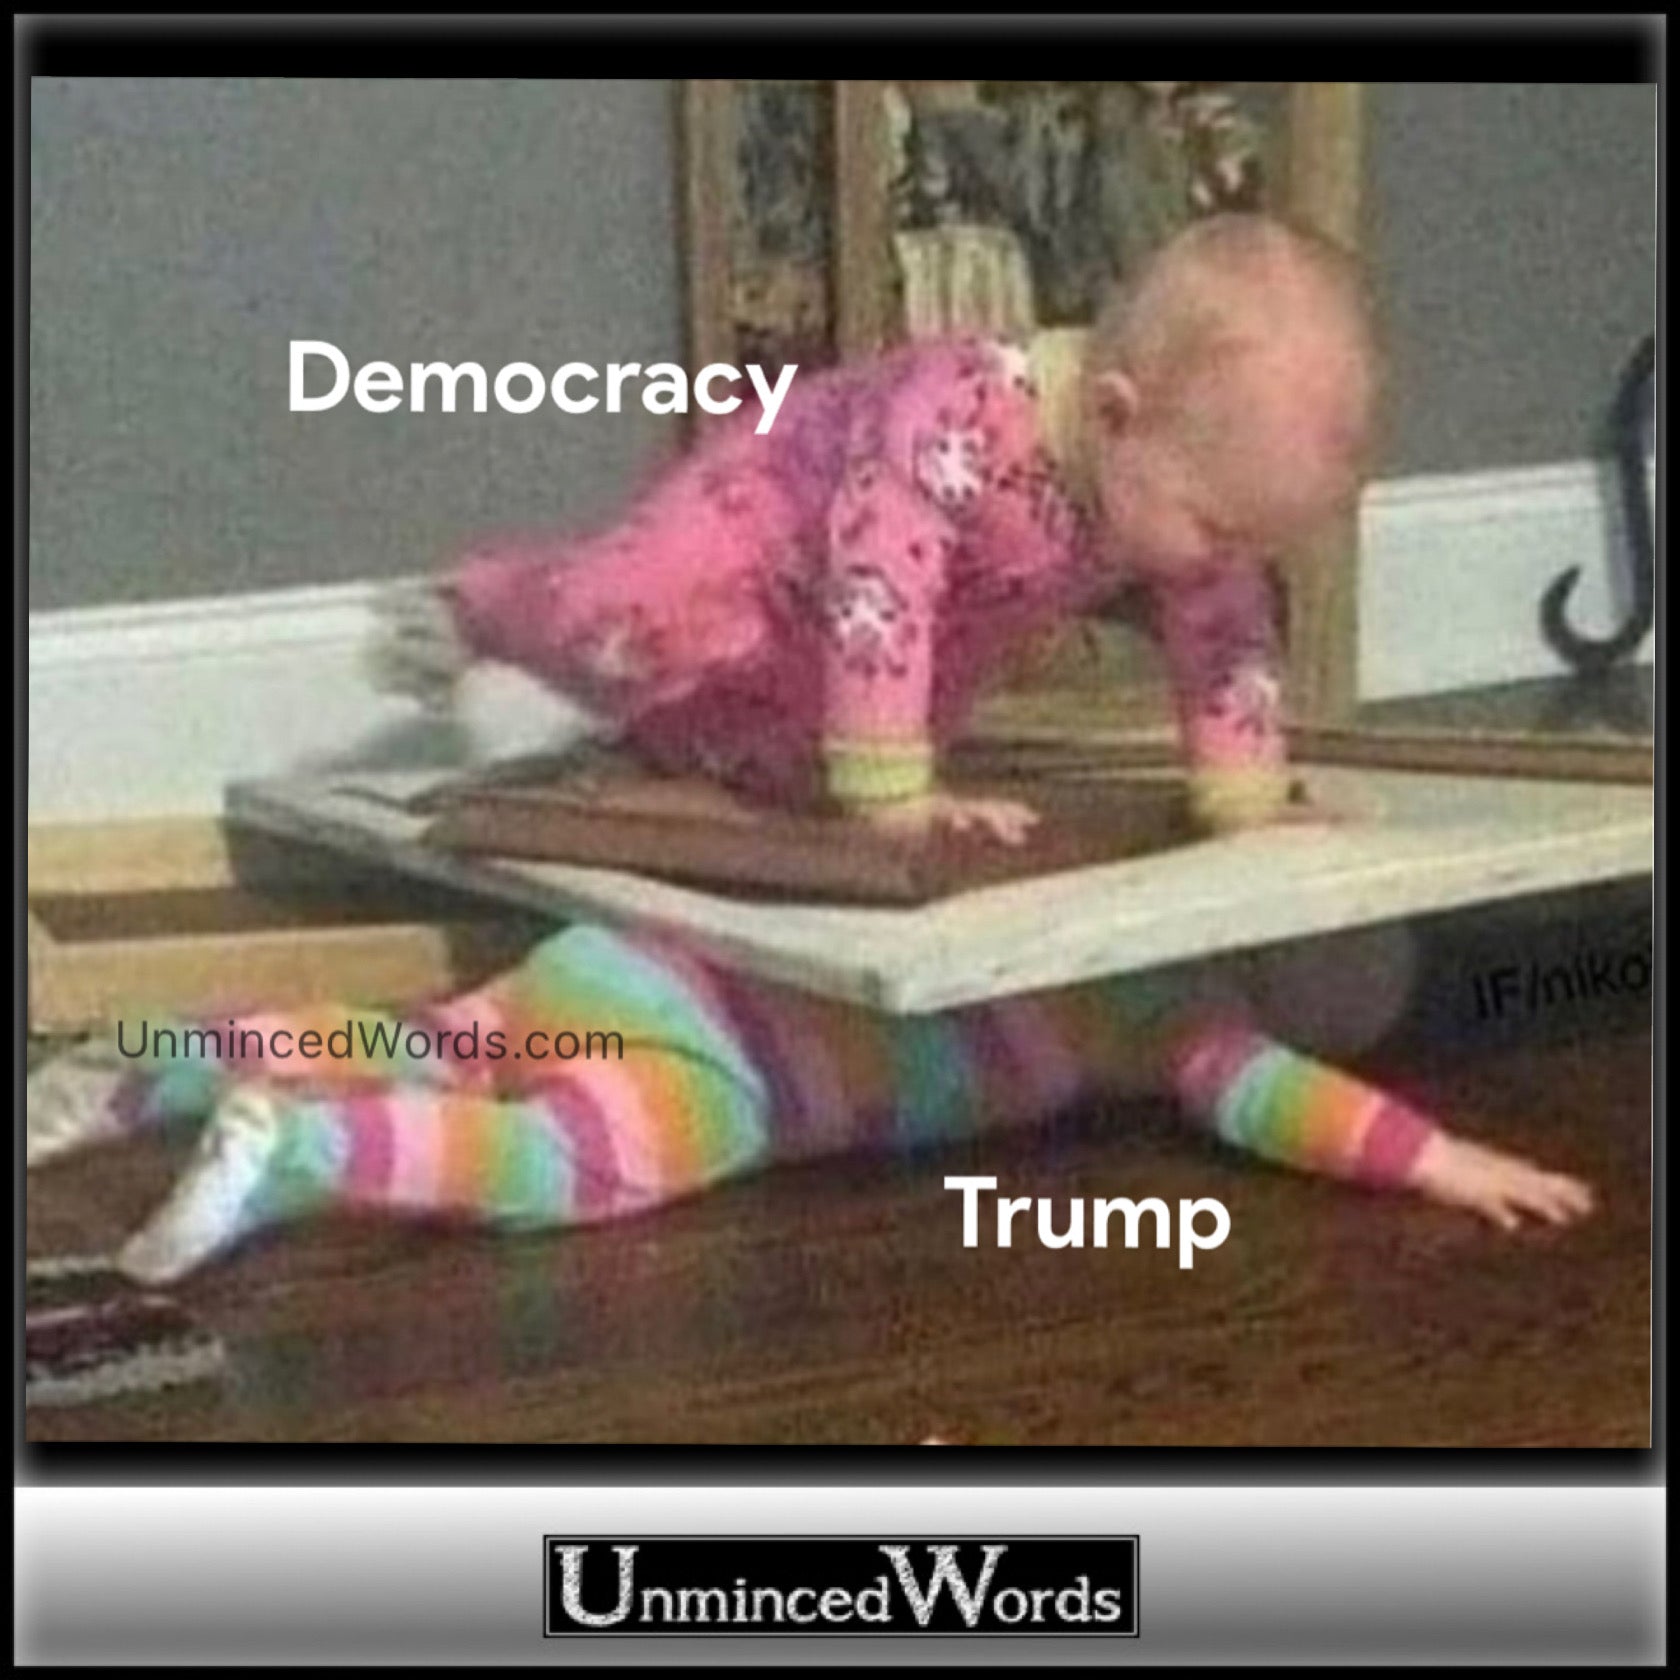 ‘Democracy and Trump’ meme completed my weekend